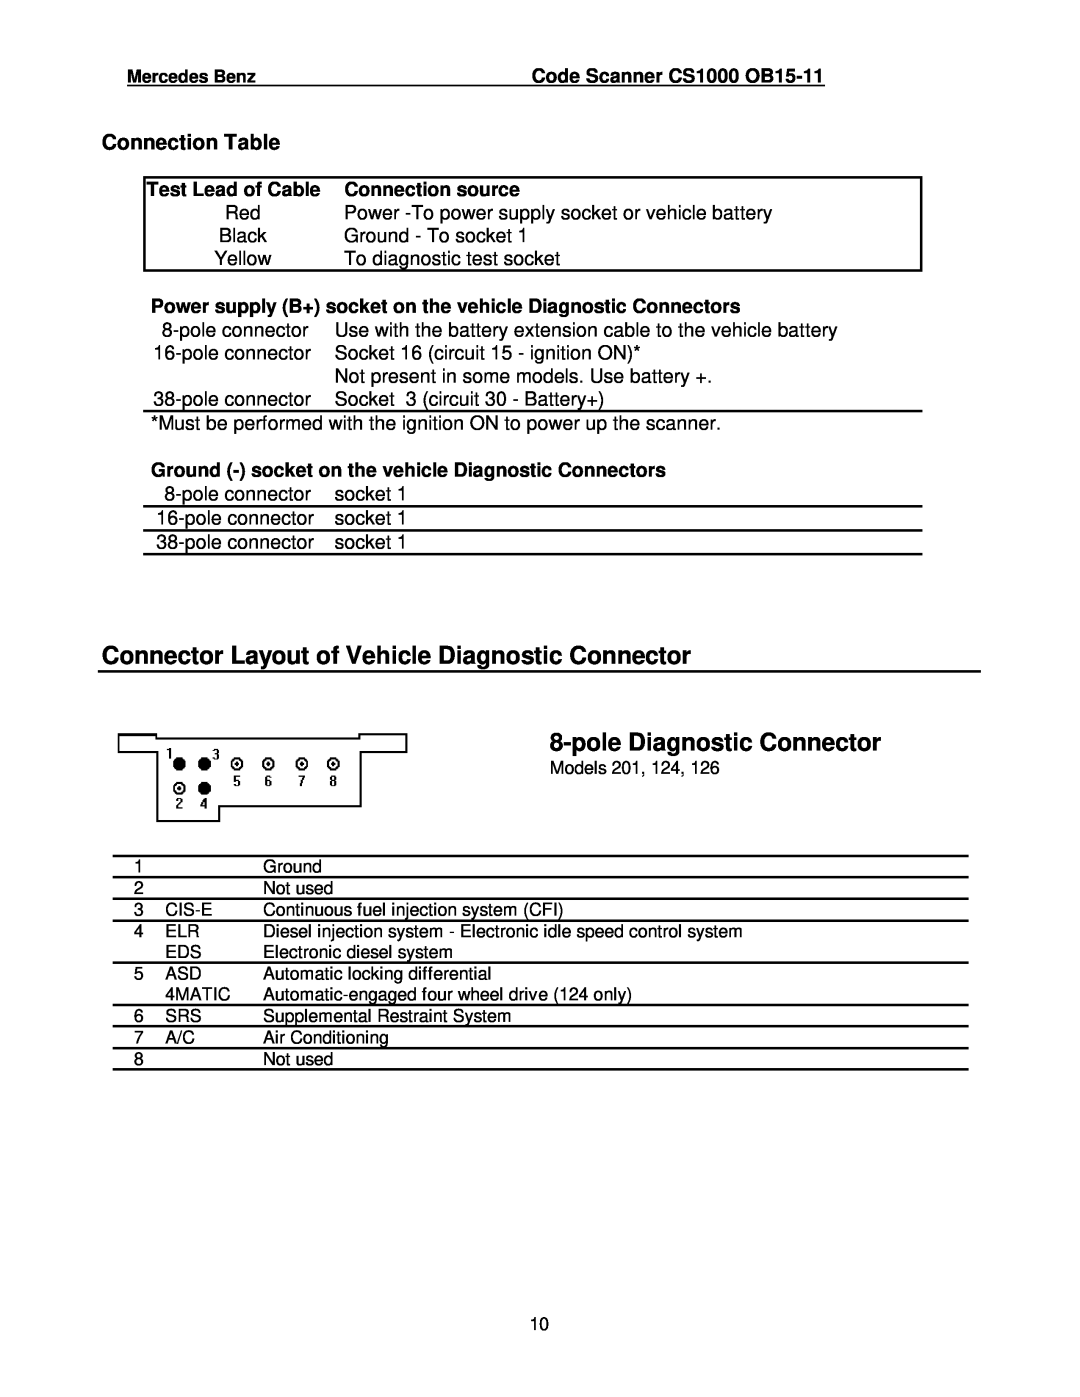 Mercedes-Benz CS1000 manual Connector Layout of Vehicle Diagnostic Connector, pole Diagnostic Connector, Connection Table 